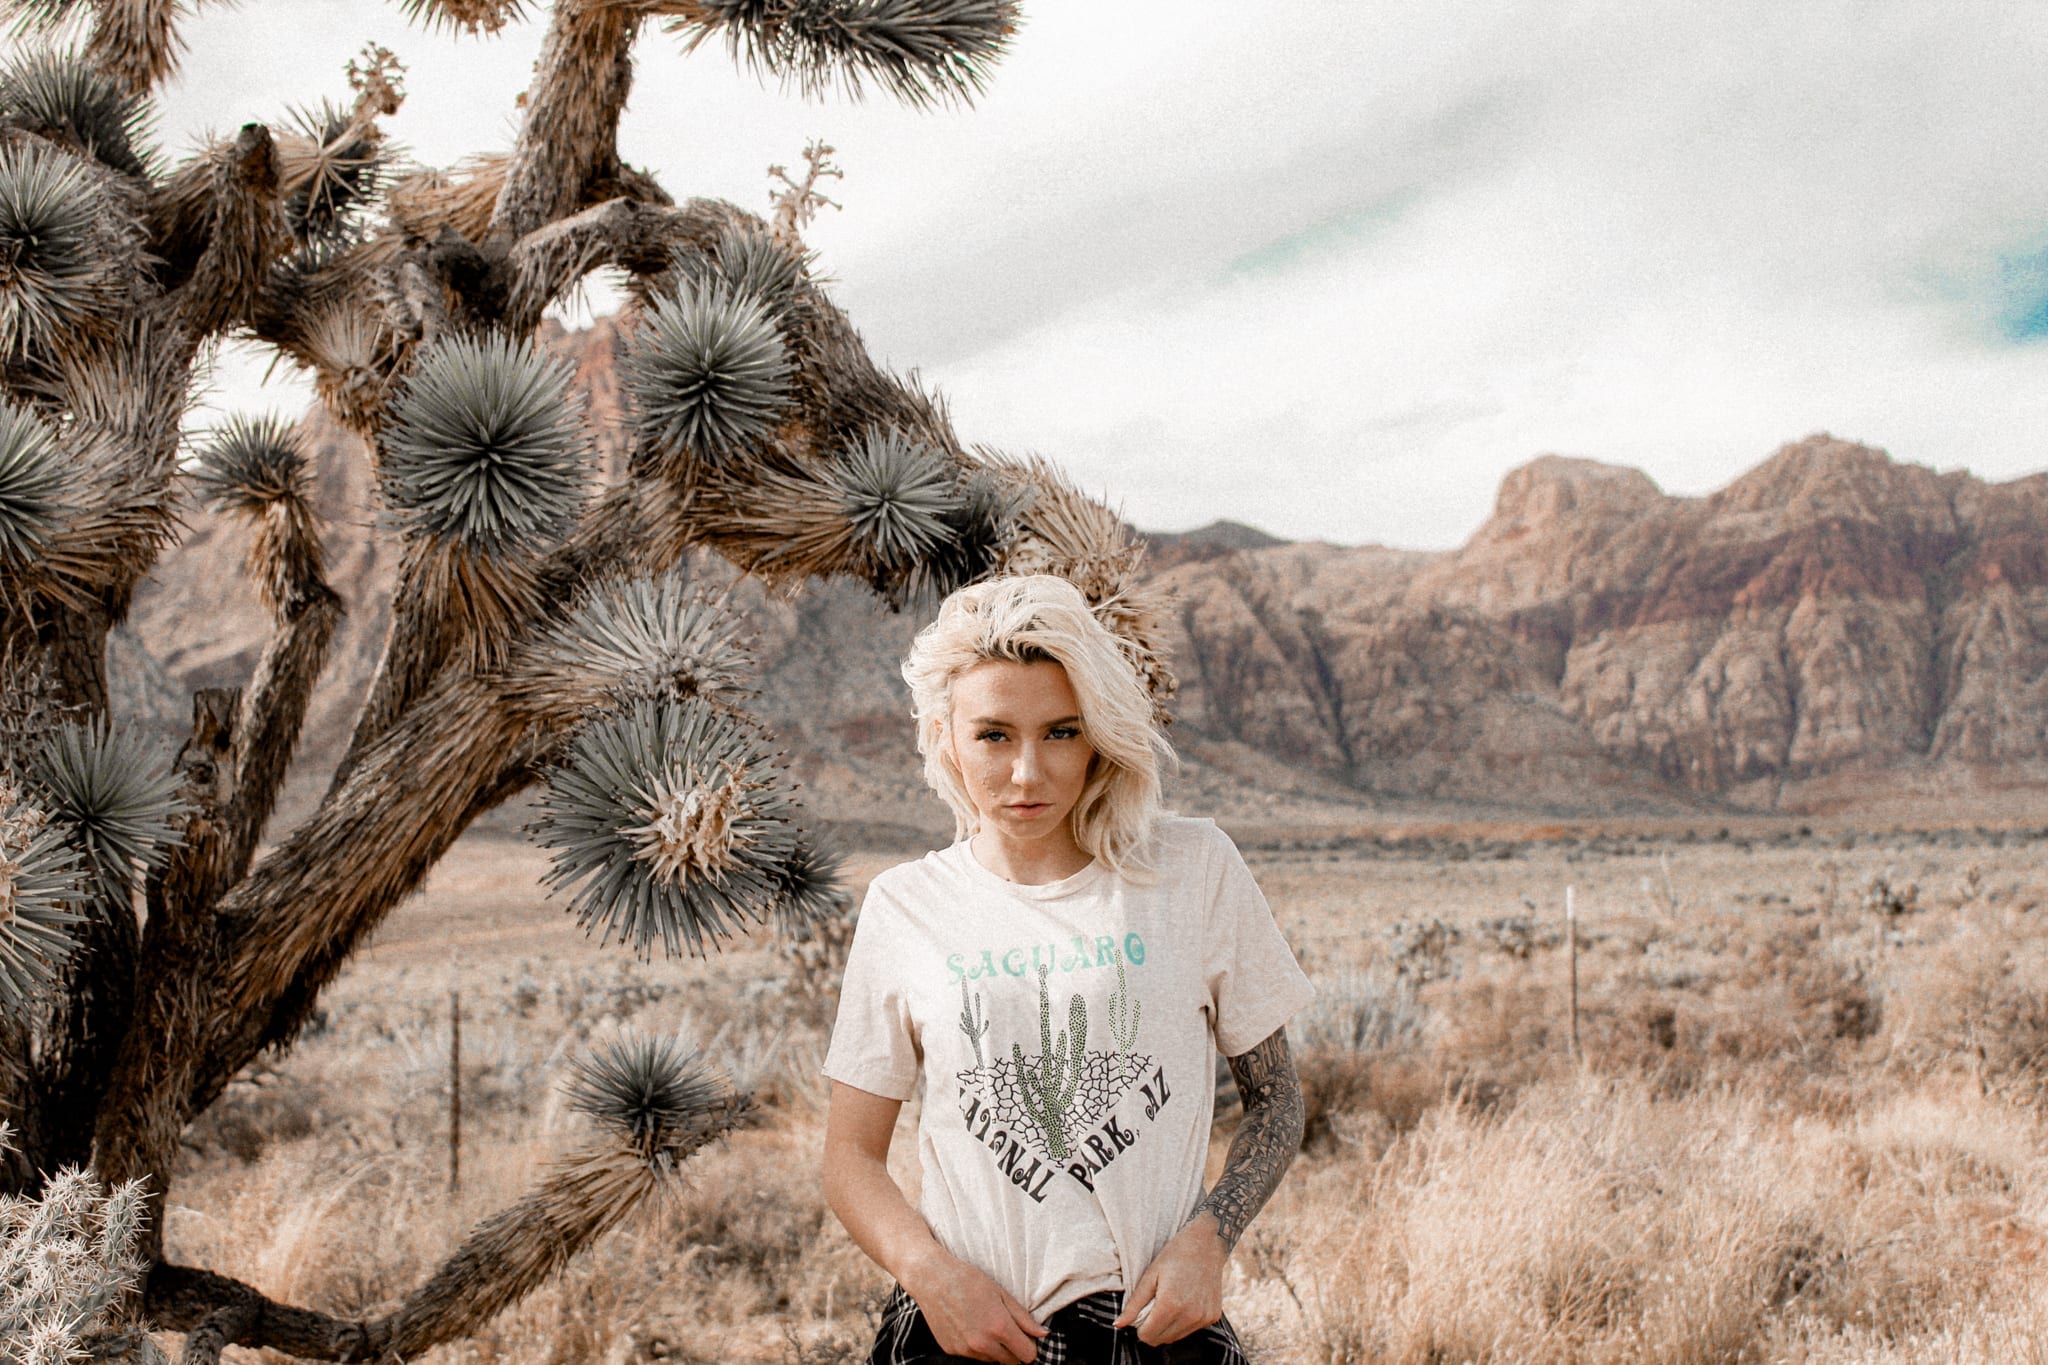 woman standing next to a joshua tree in a cream colored saguaro national park t-shirt